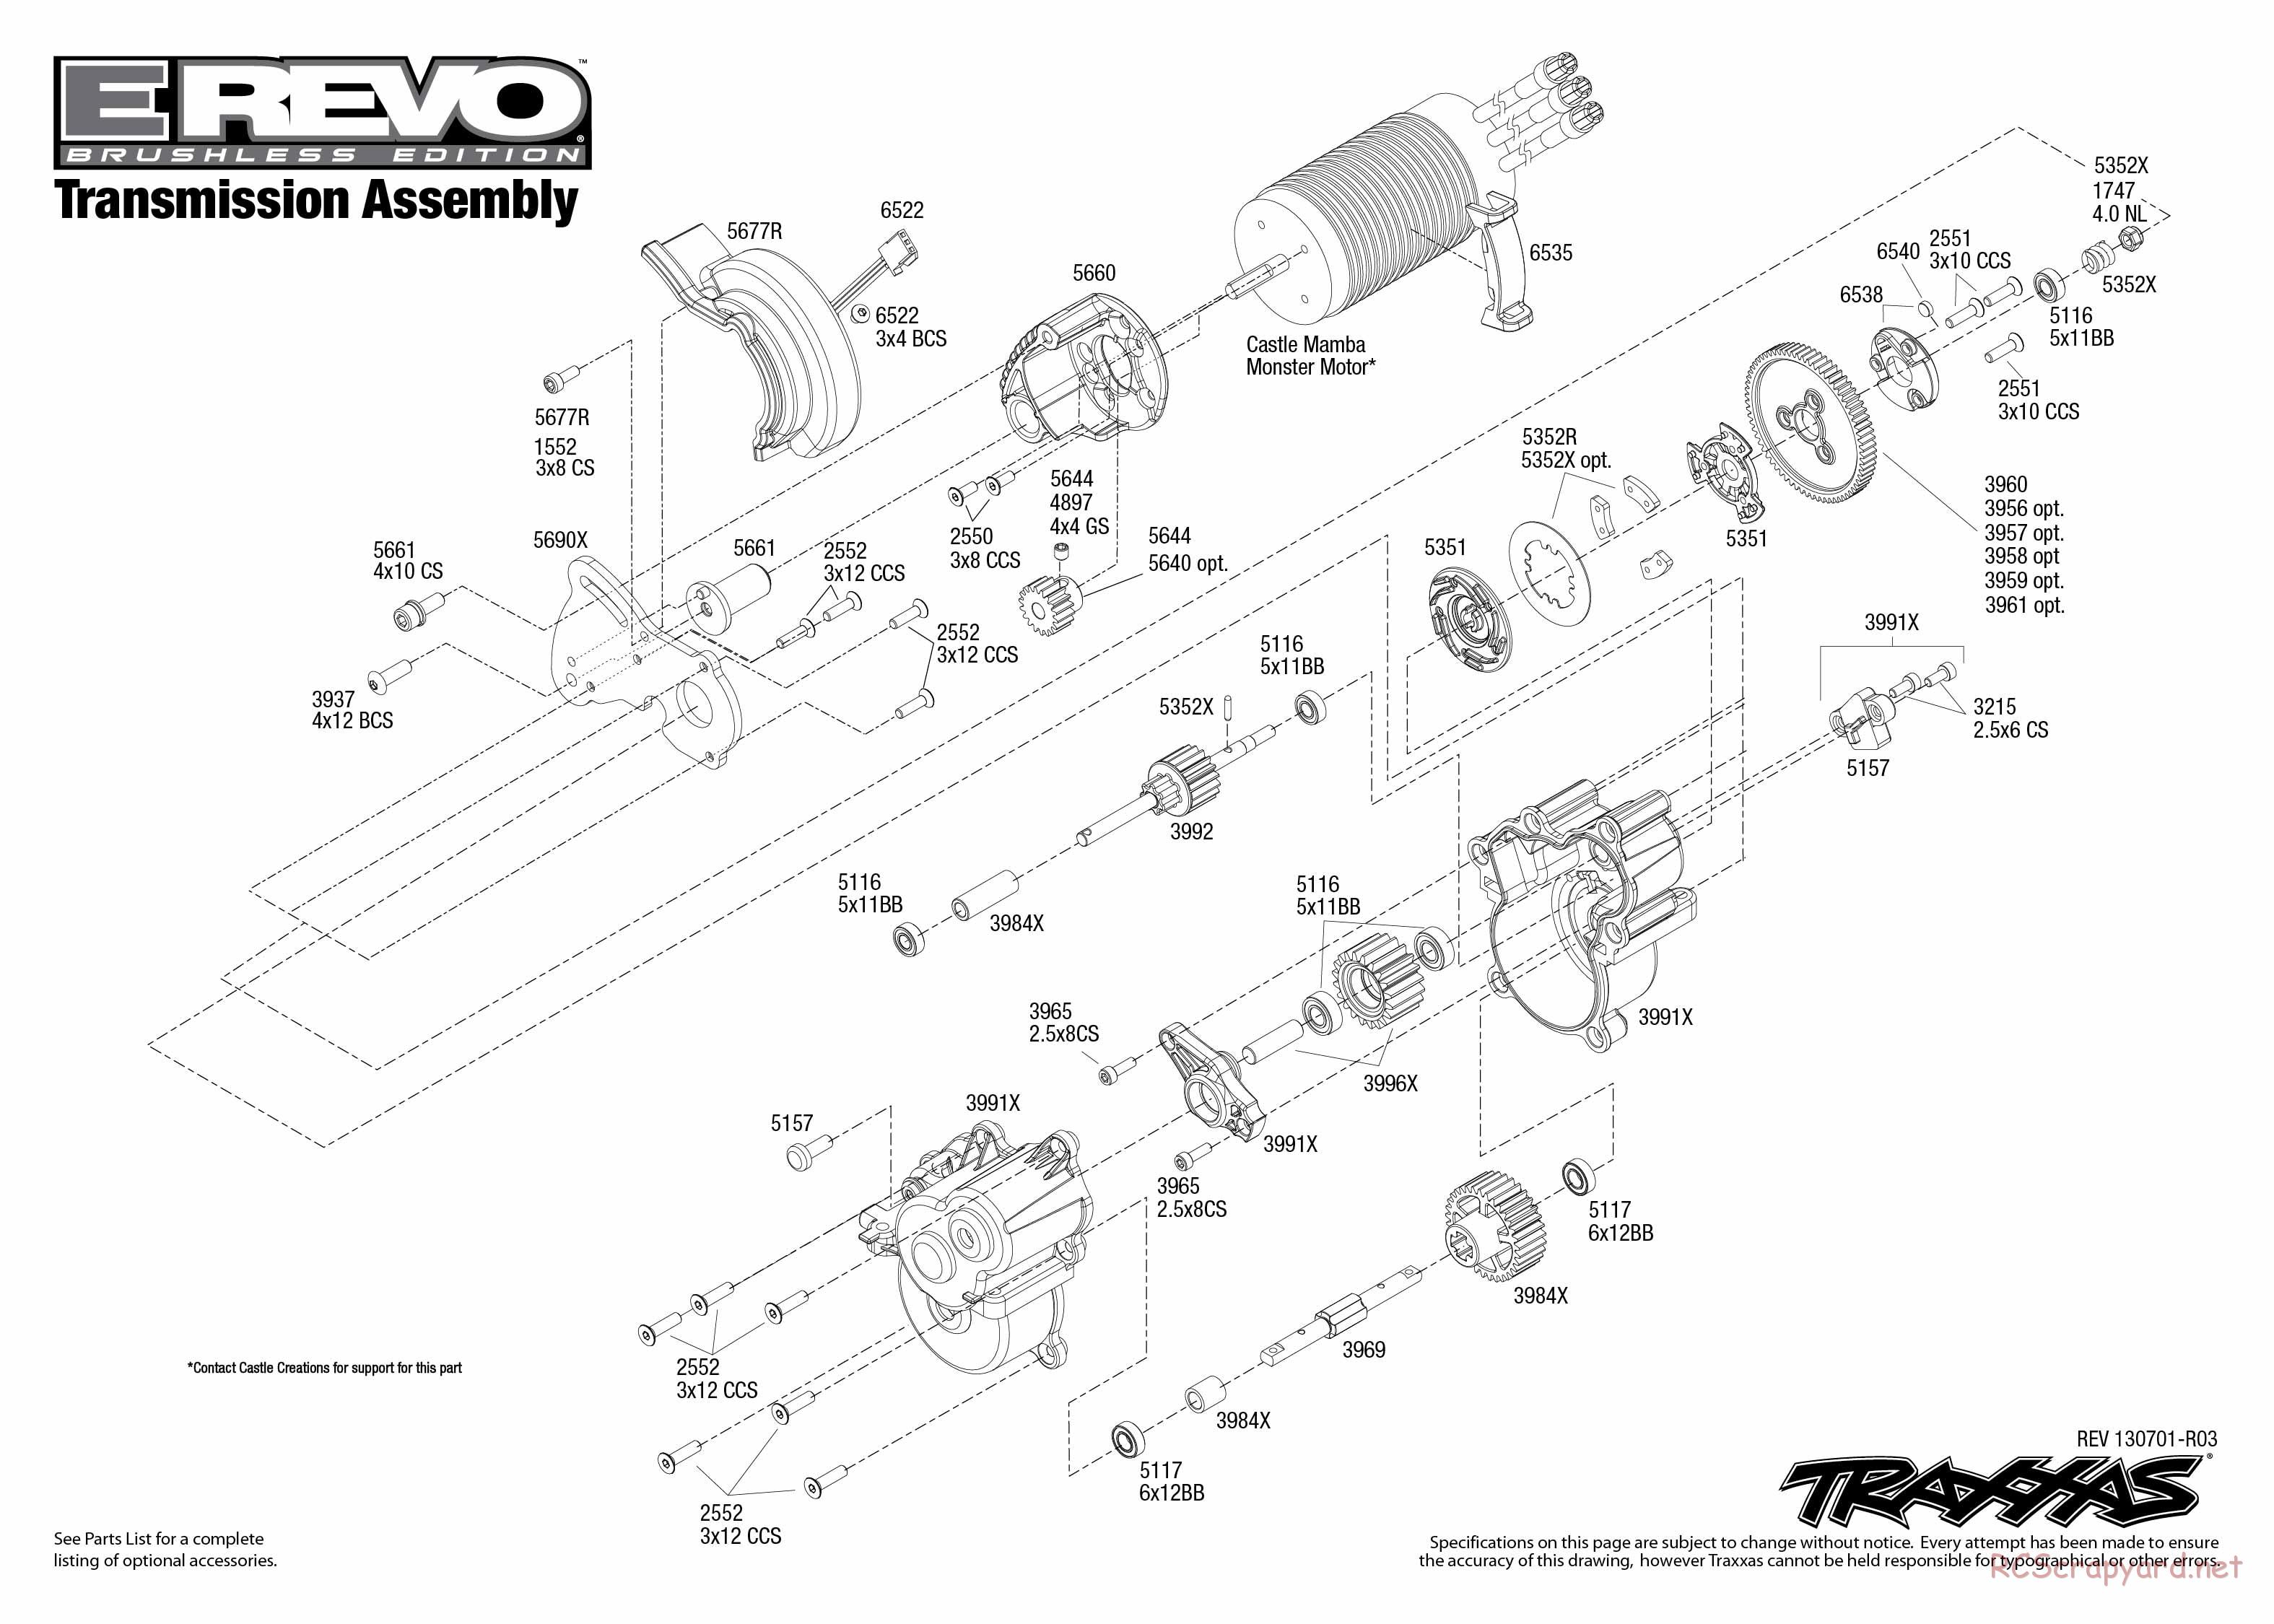 Traxxas - E-Revo Brushless (2012) - Exploded Views - Page 3